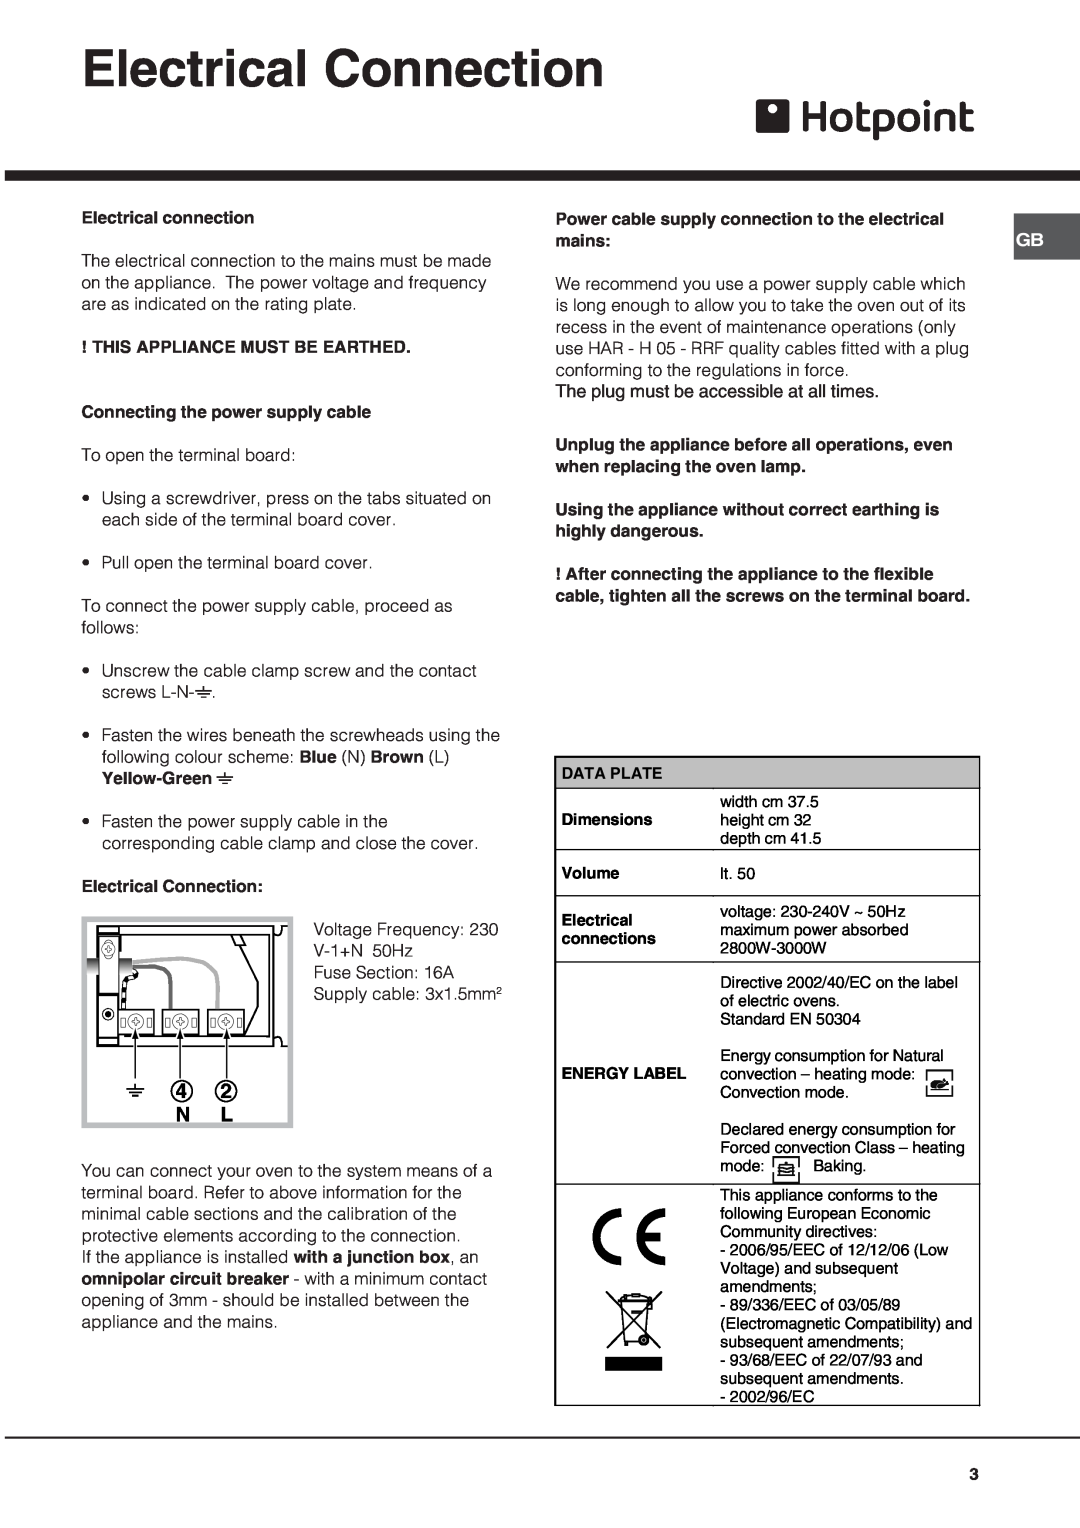 Hotpoint SE861X/1 manual Electrical Connection, 4 2 N L, The plug must be accessible at all times 